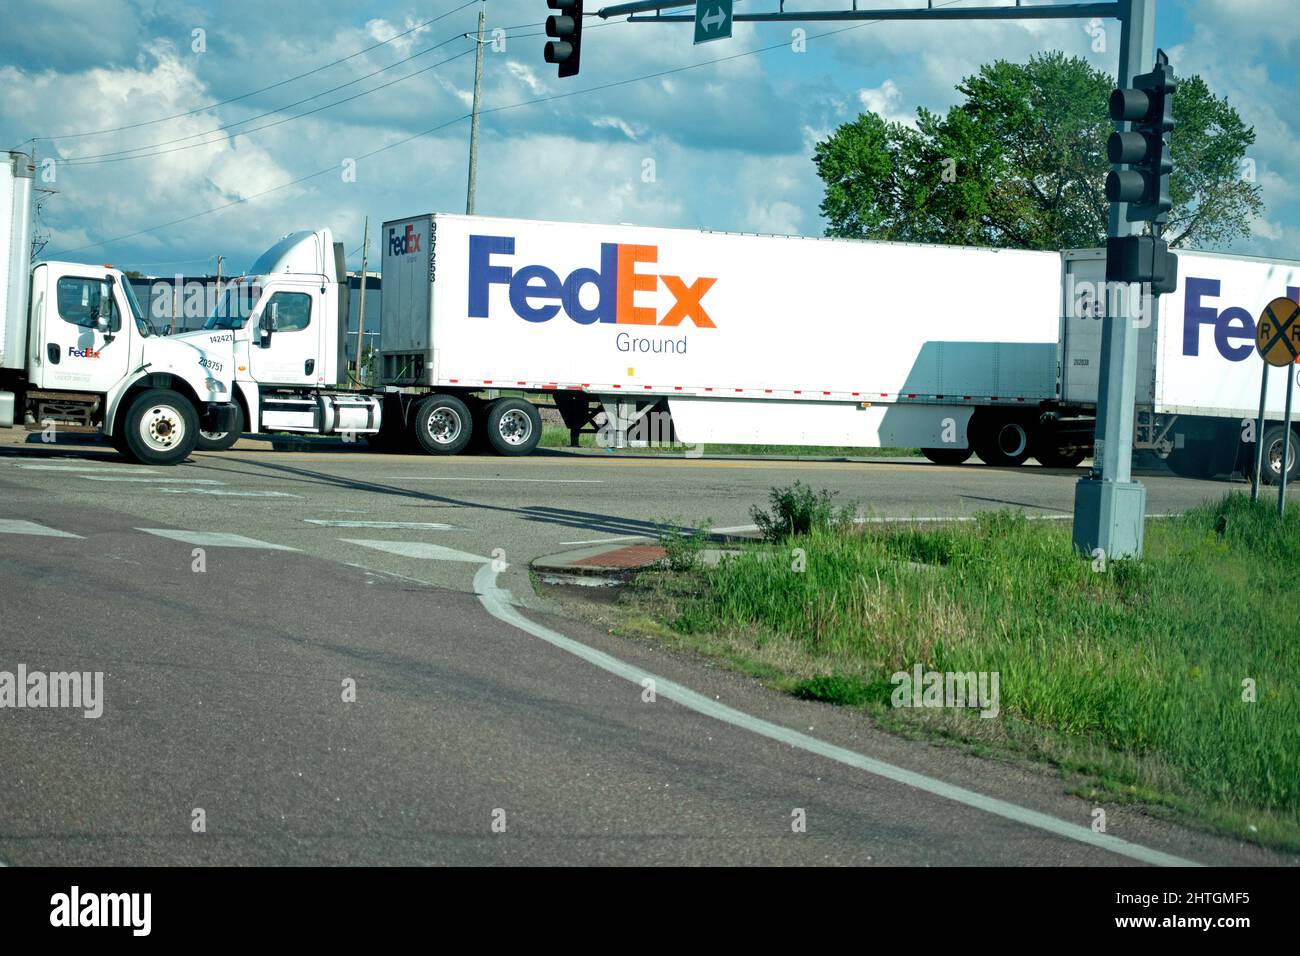 FedEx semi trucks lined up for deliveries at an intersection. Shakopee Minnesota MN USA Stock Photo